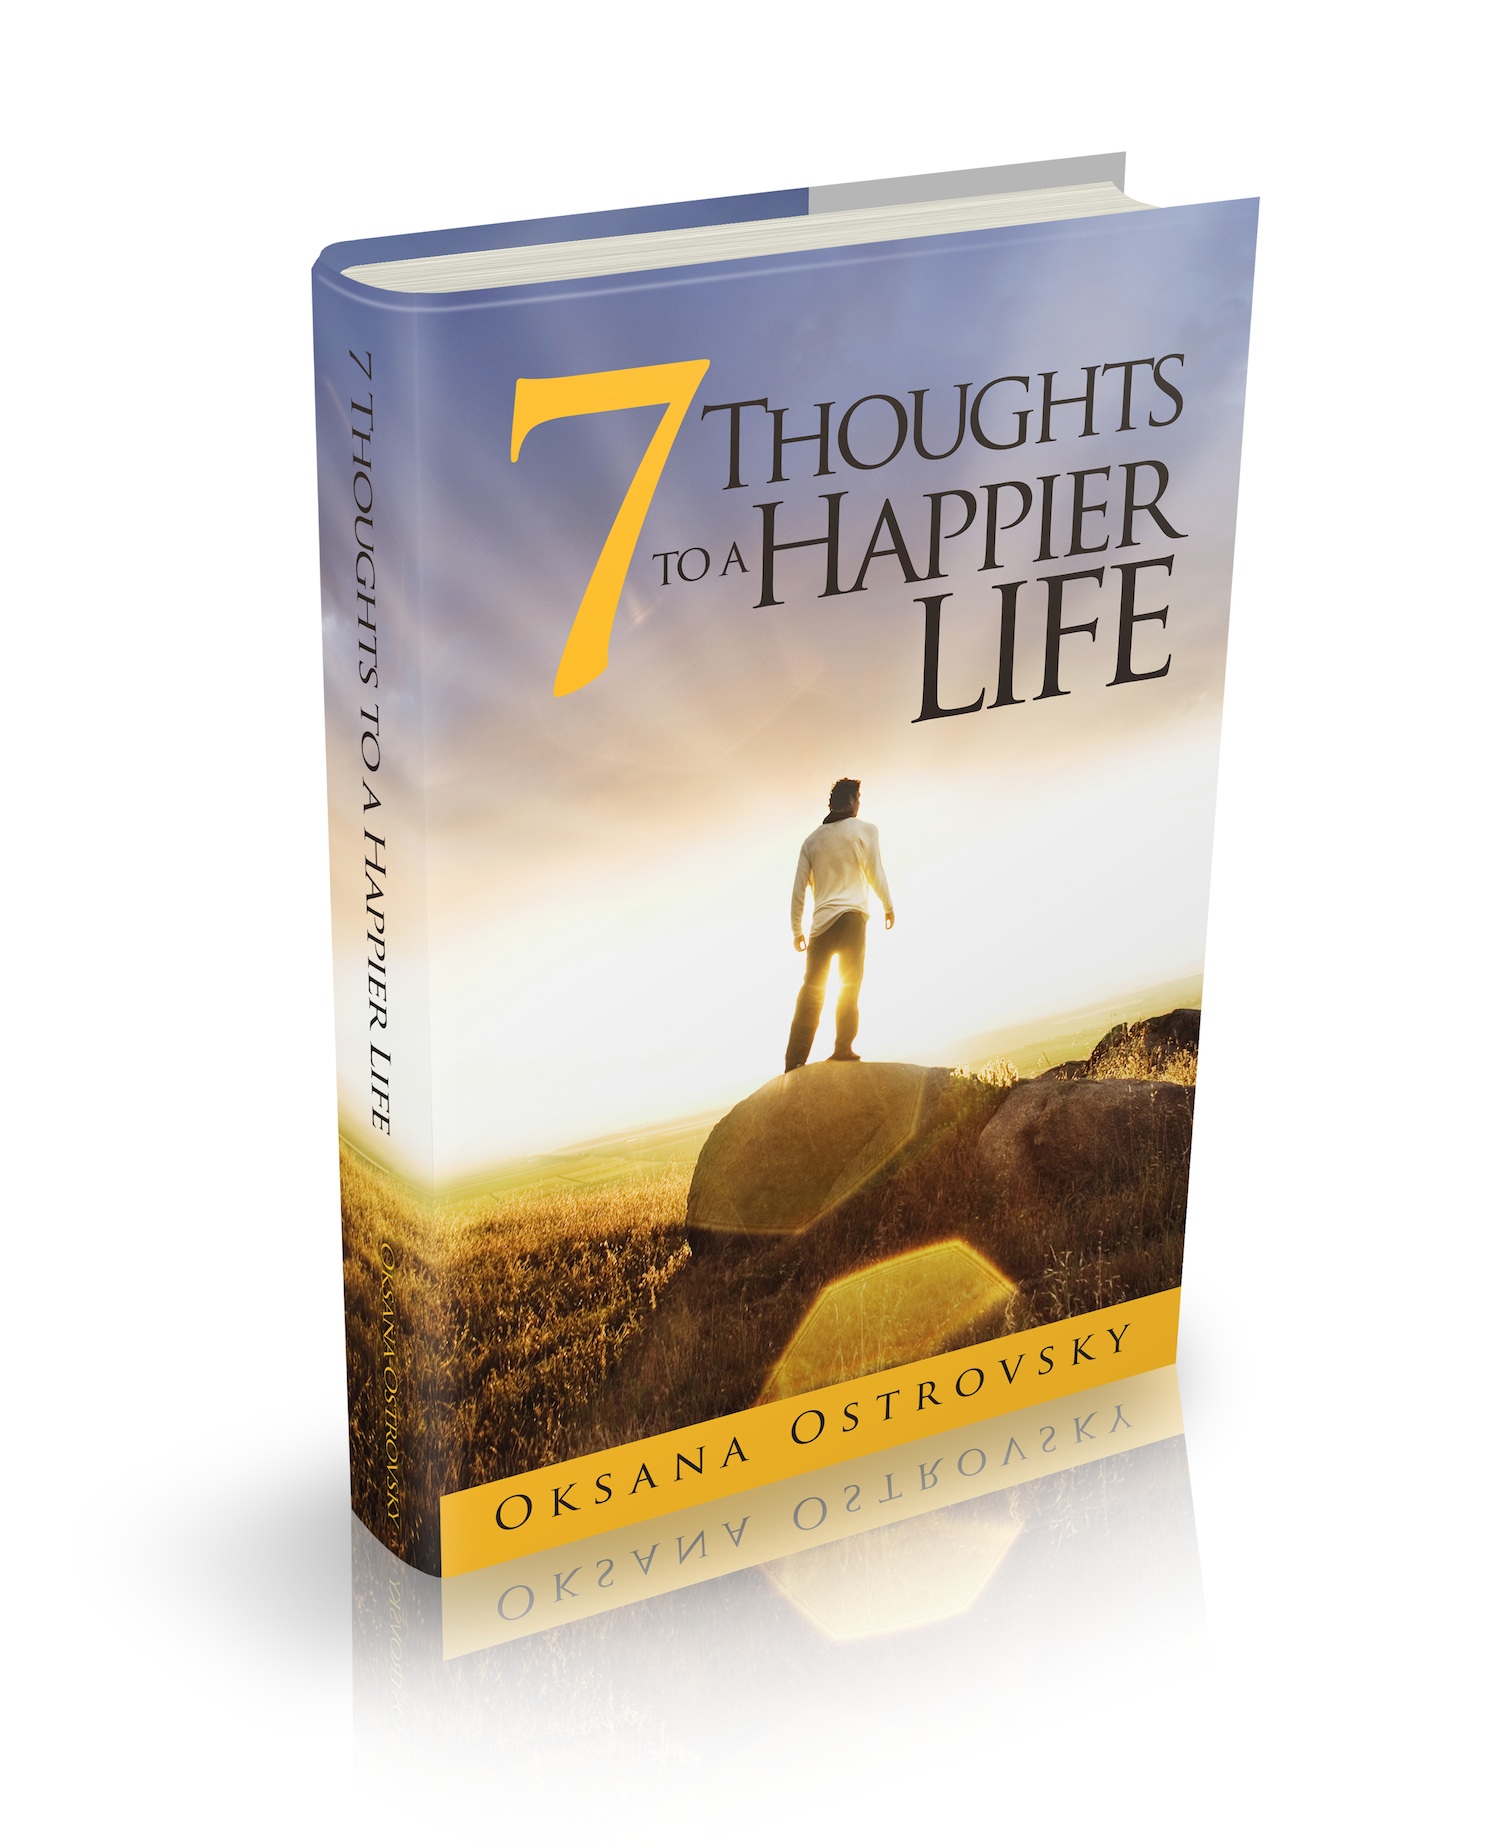 7 Thoughts to a Happier Life_sm